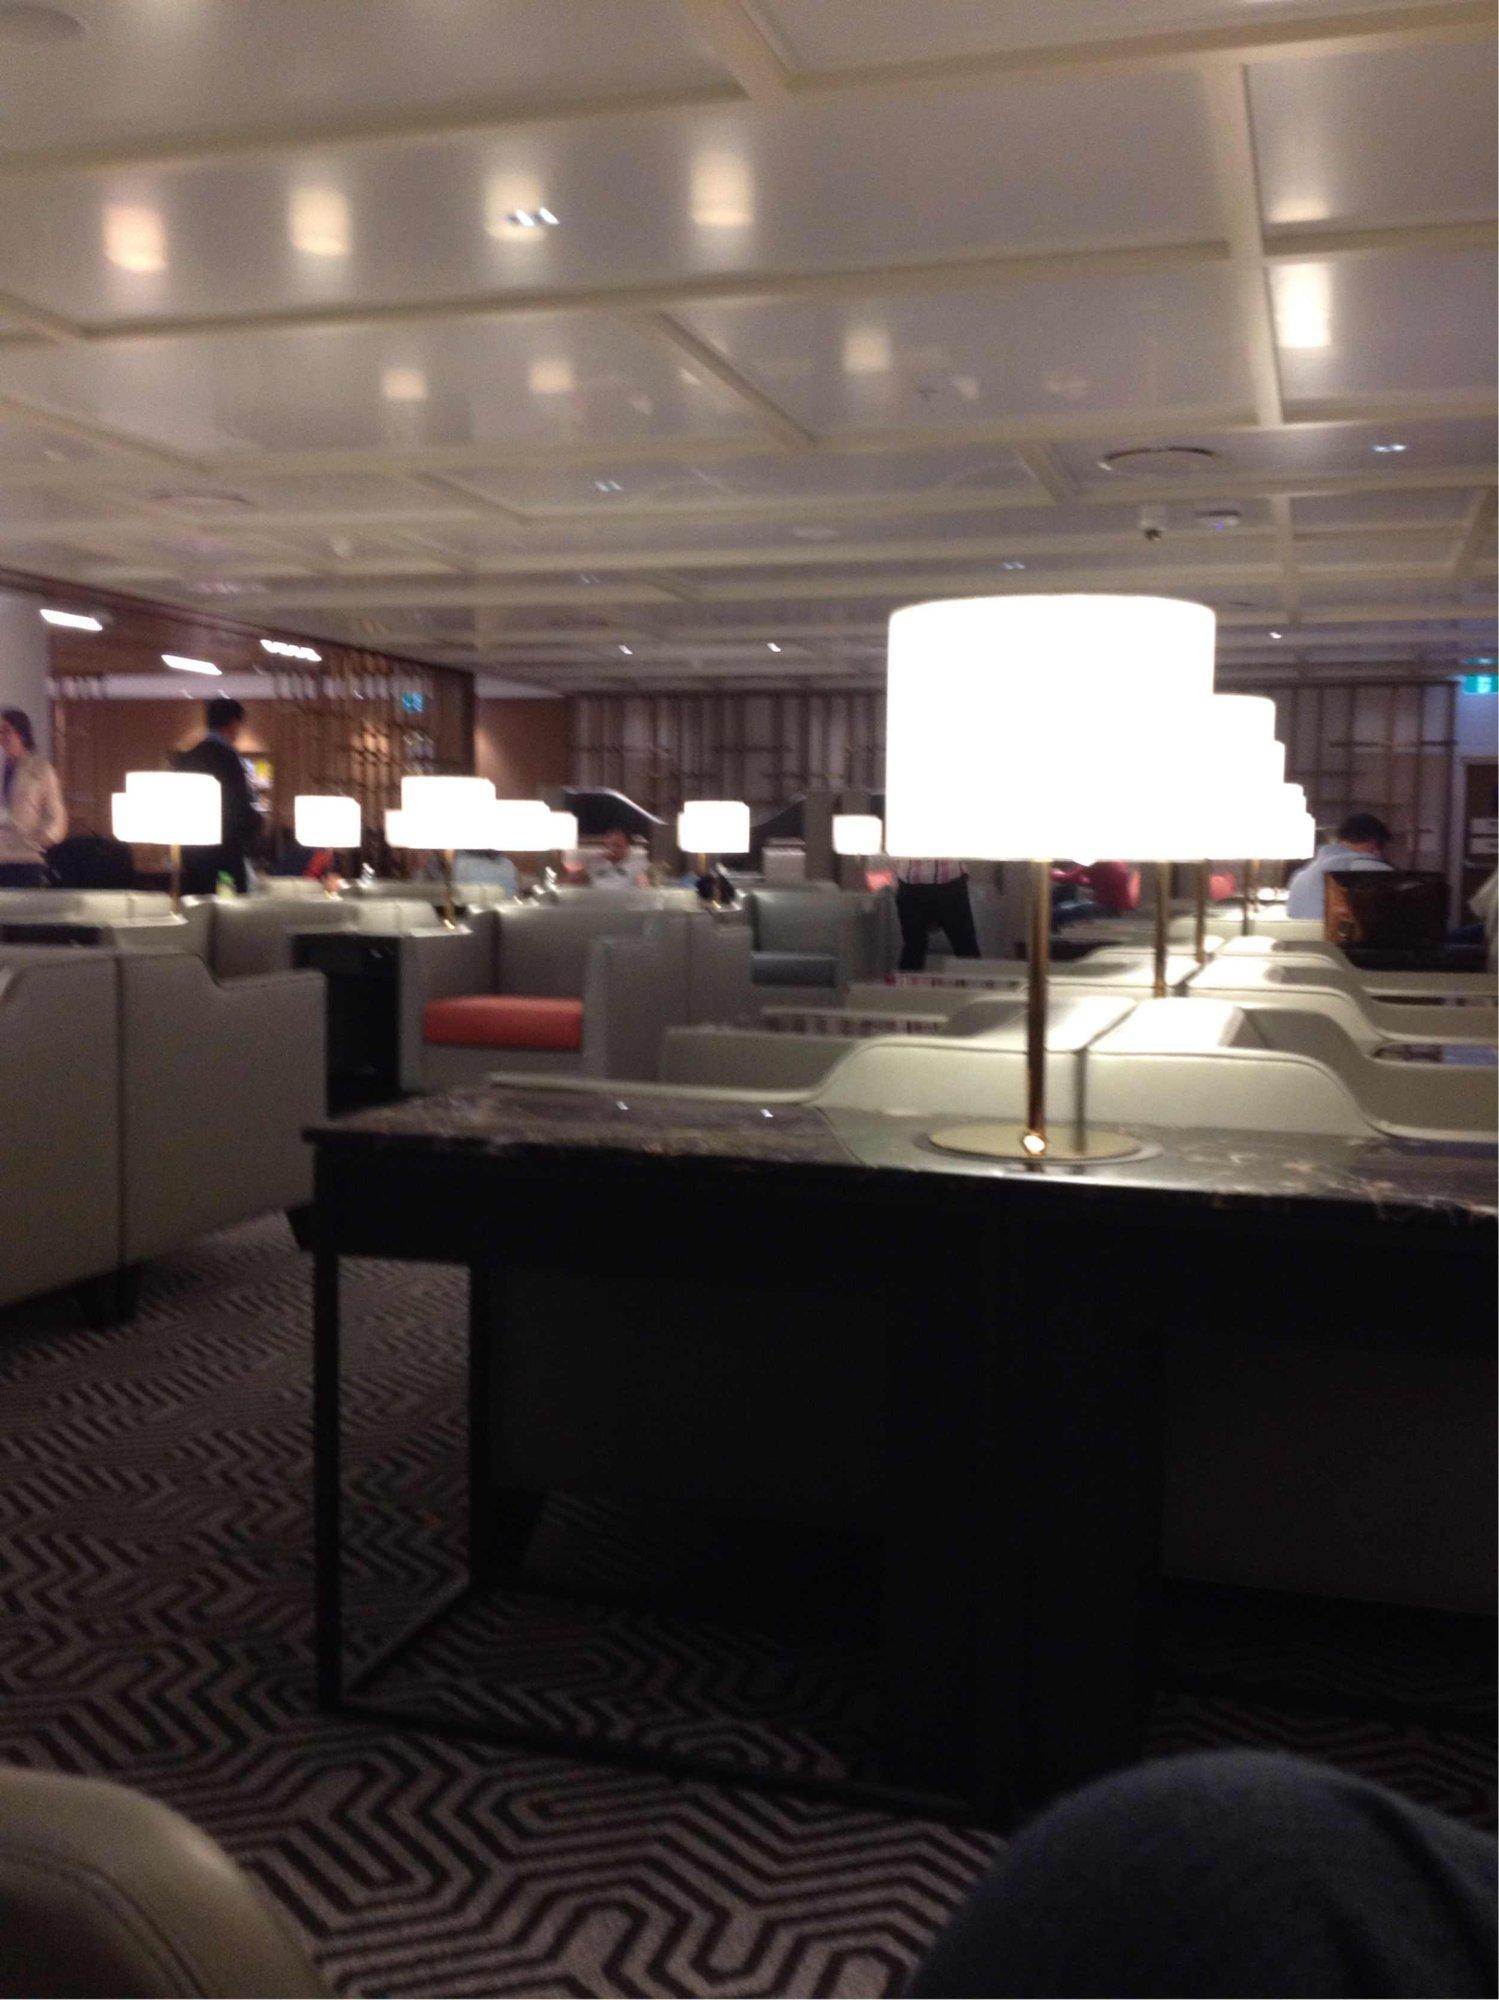 Singapore Airlines SilverKris Business Class Lounge image 10 of 20